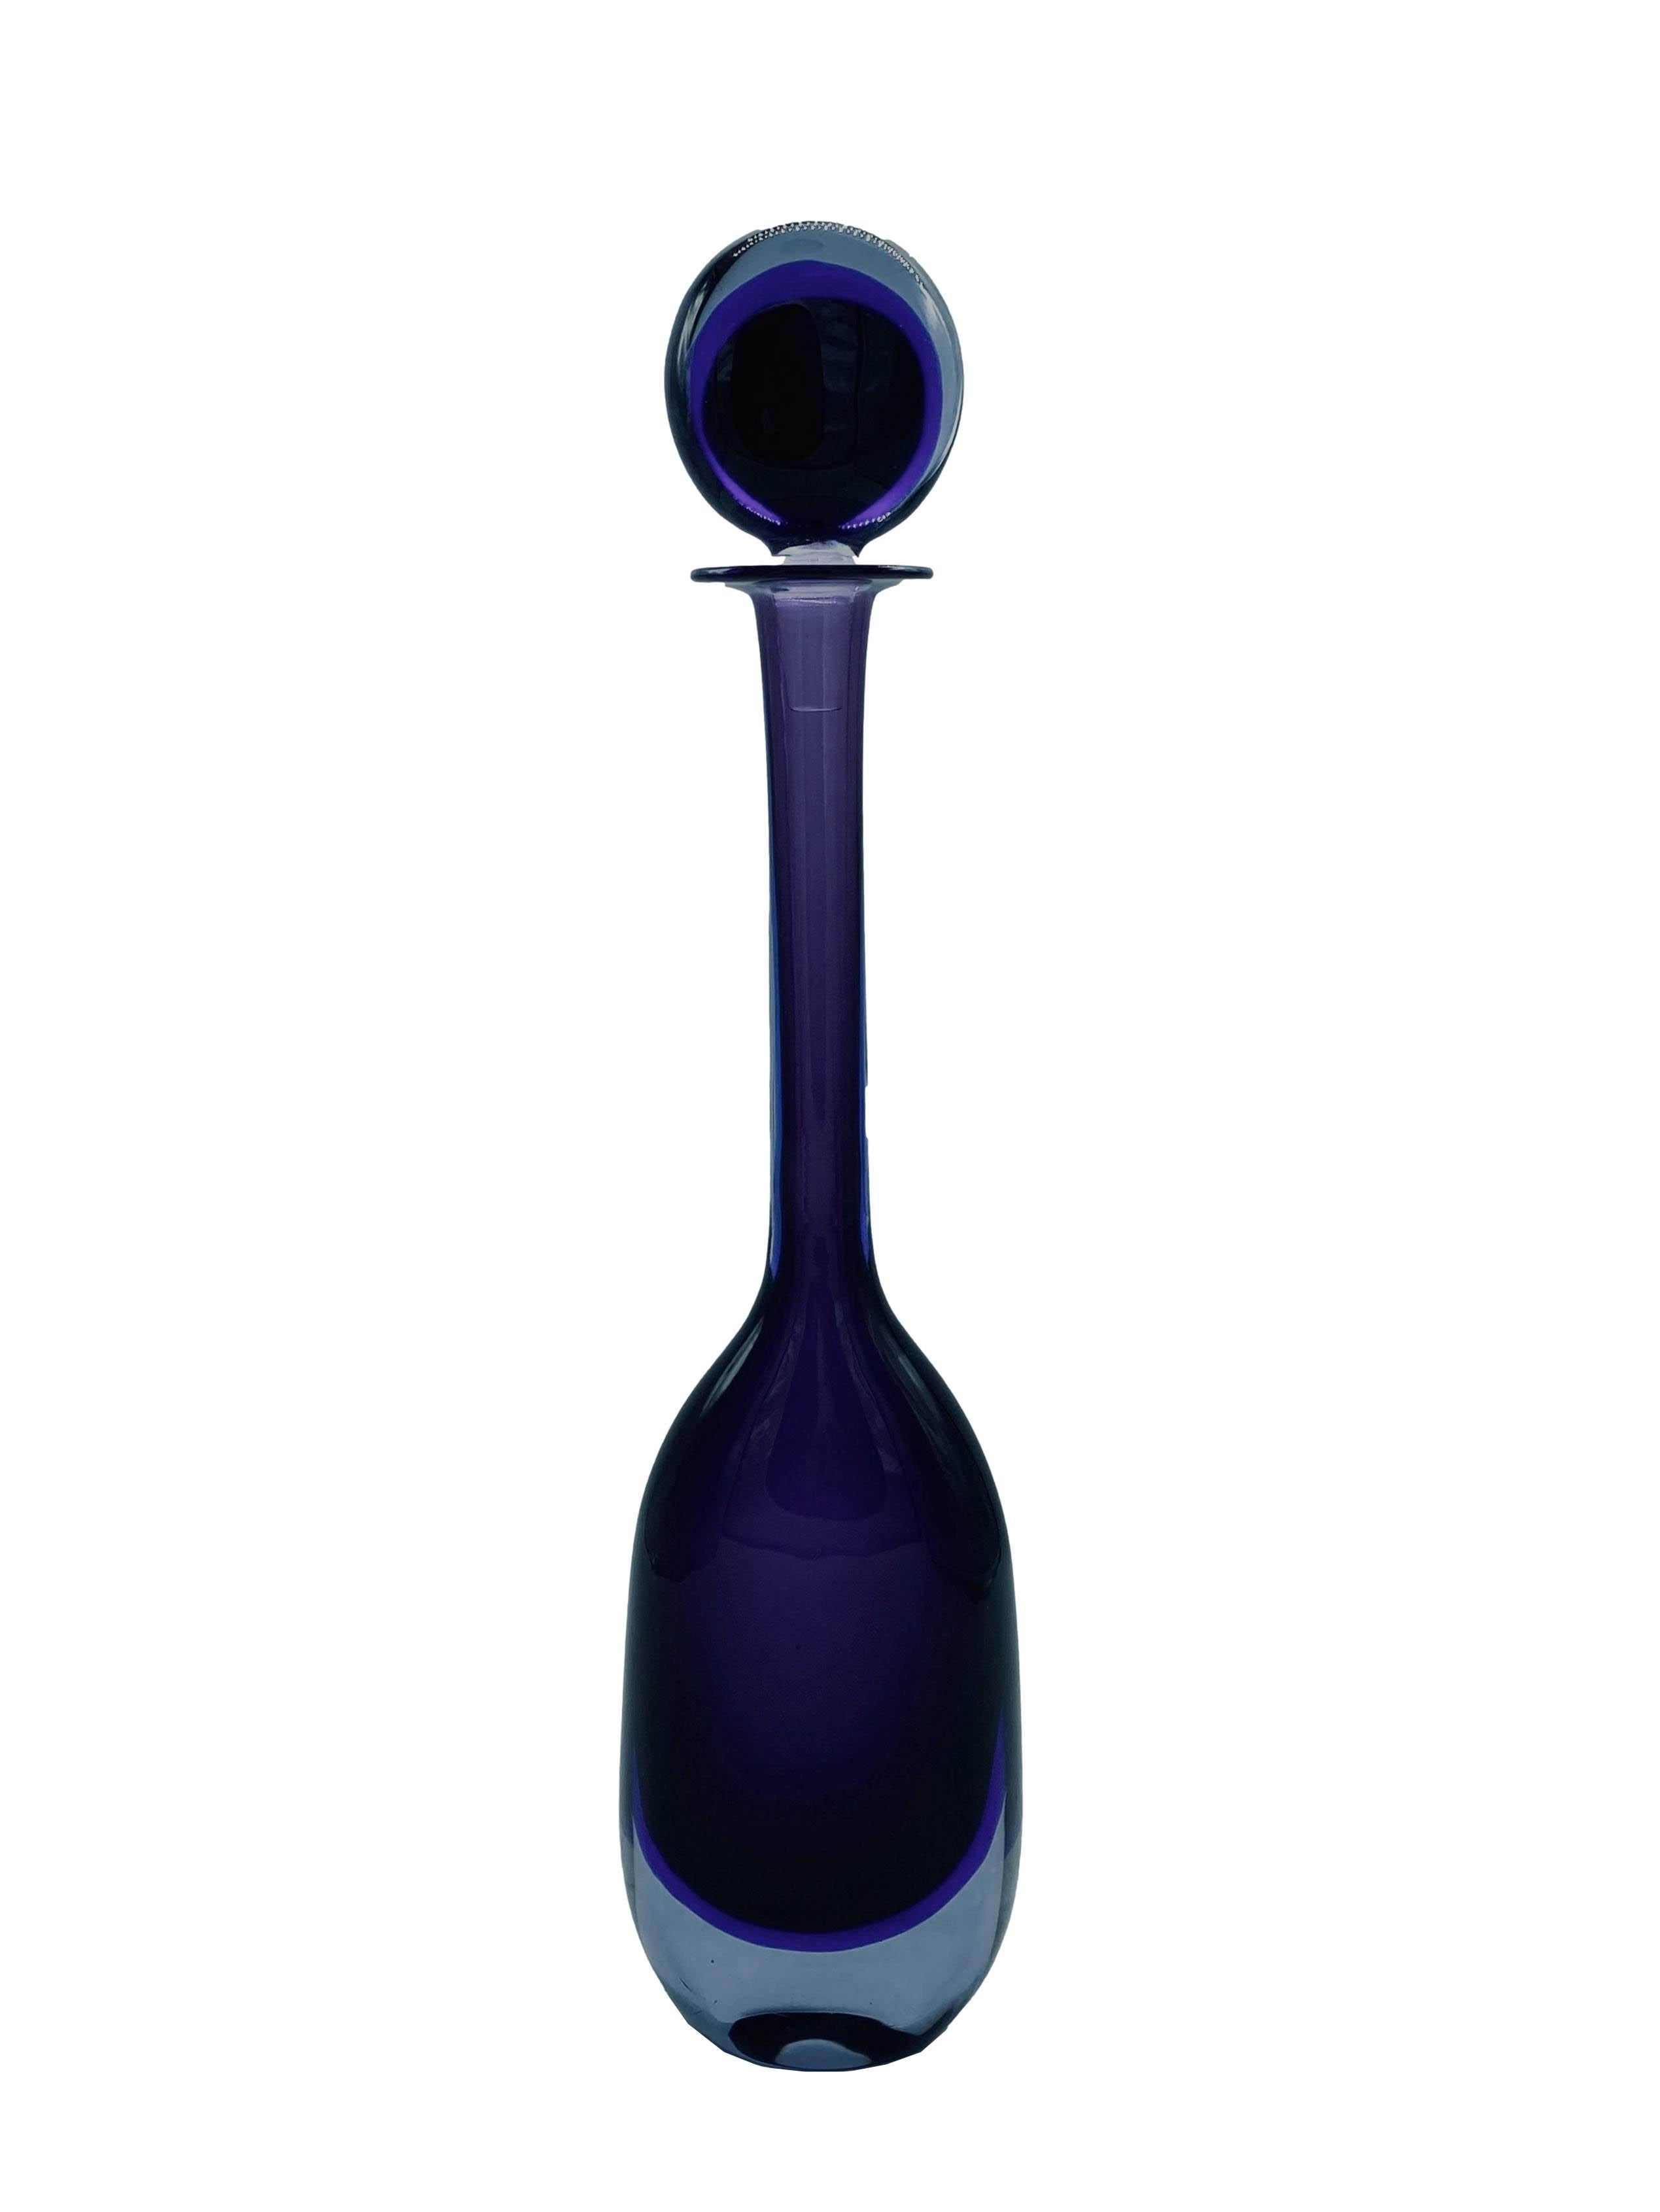 Beautiful large bottle with stopper in the popular Submerged glass technique, the design was by Flavio Poli for Seguso Vetri d'Arte in the 1950s-1960s. Purple glass in a very elegant teardrop shape.